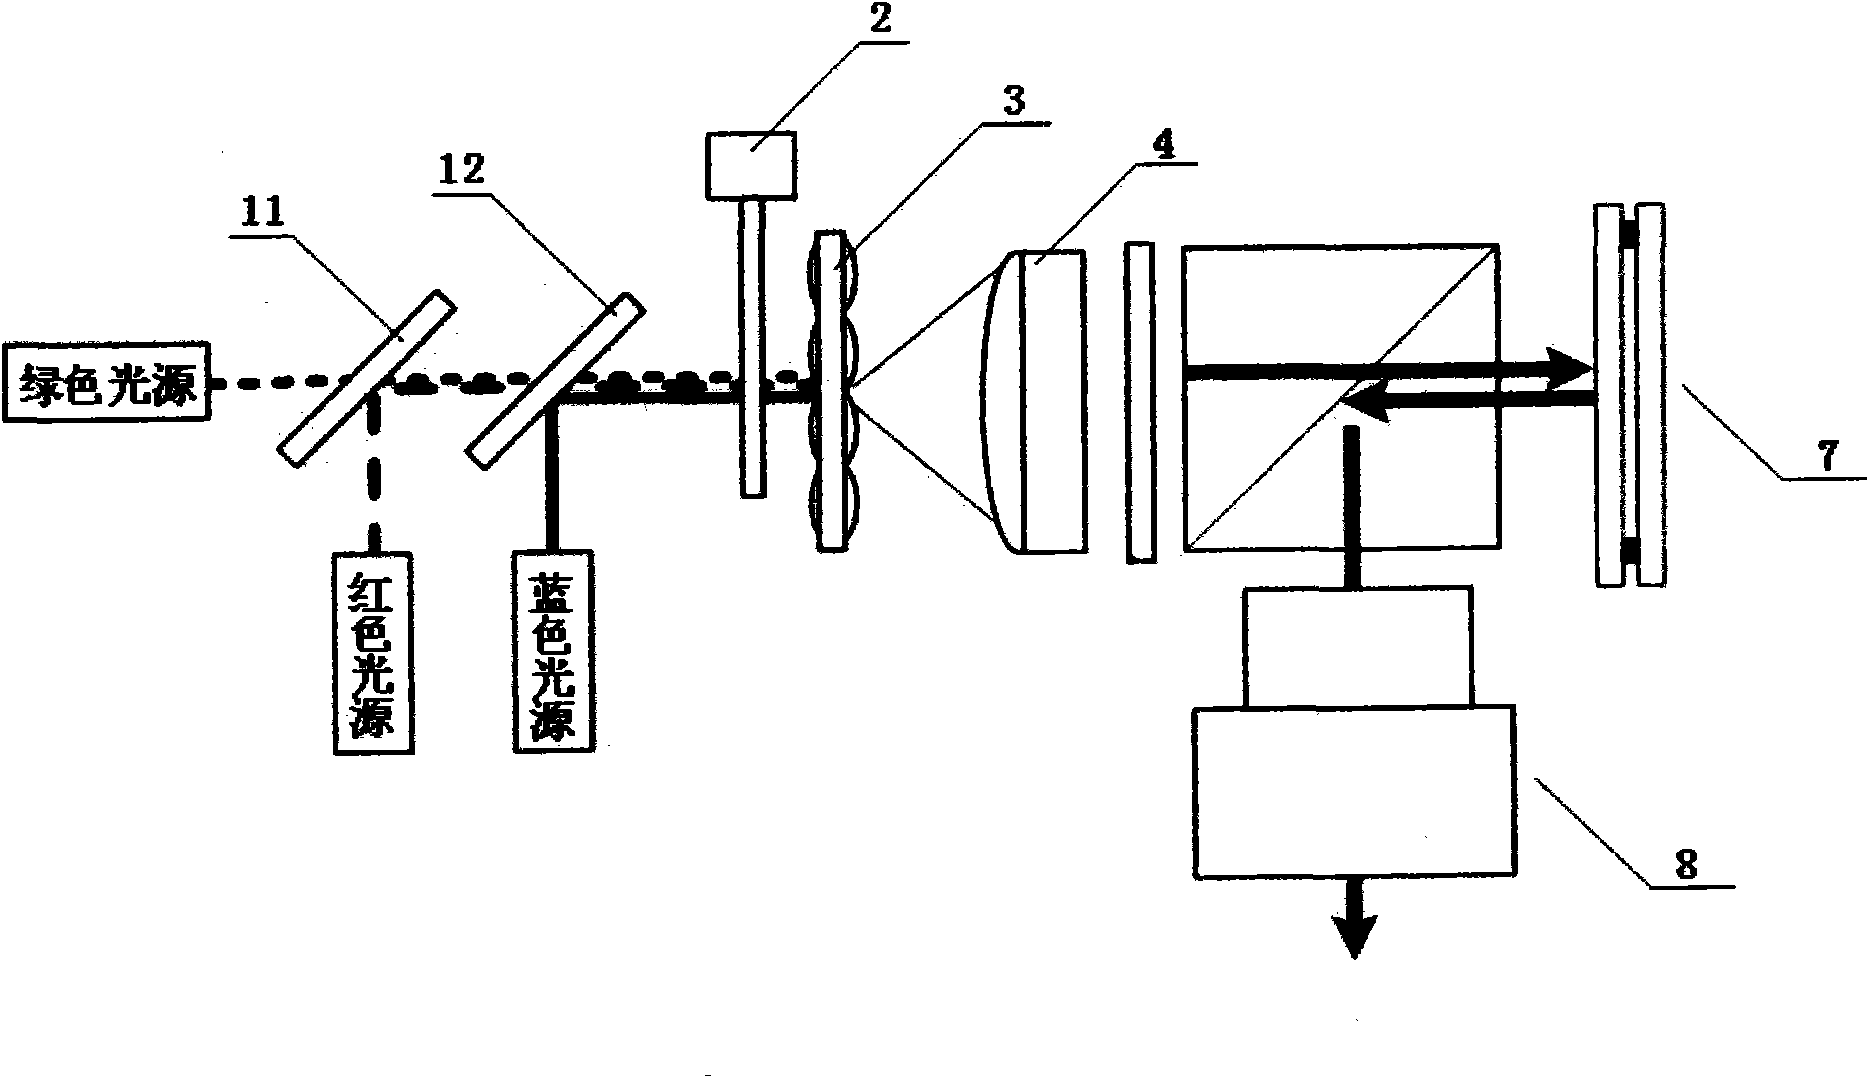 Optical engine of multiple-path green light source projector